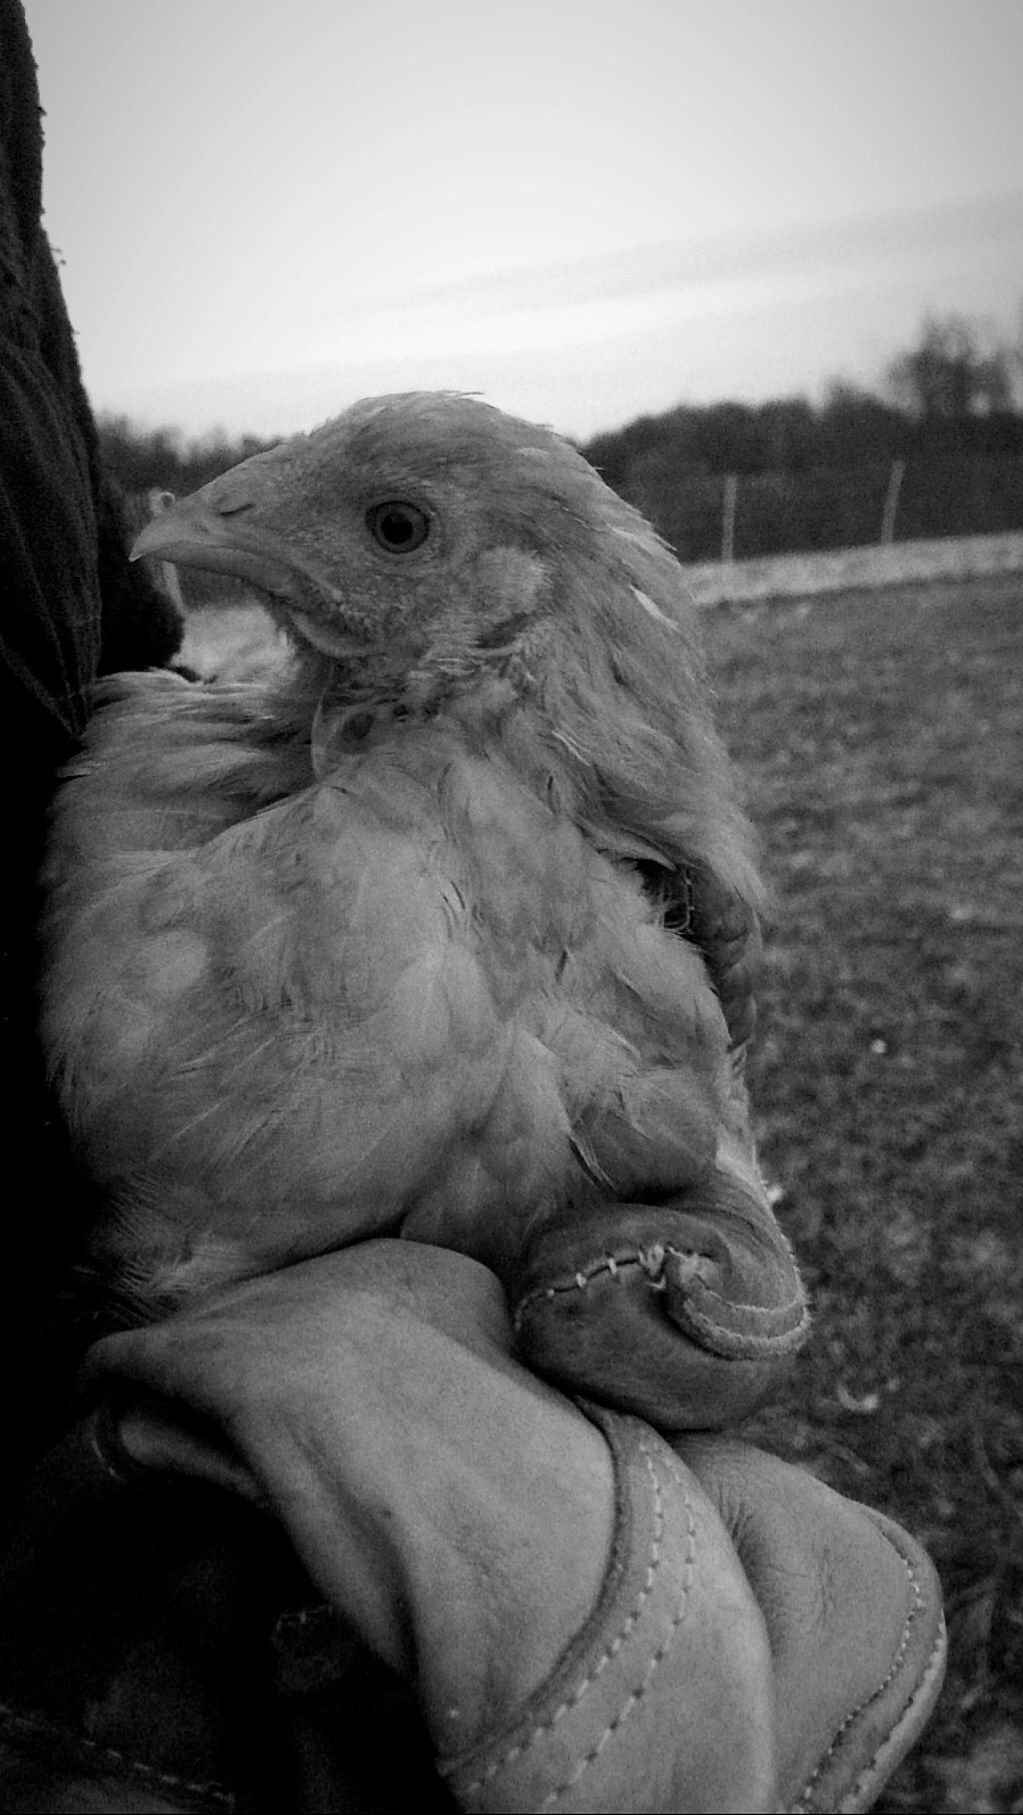 Chicken being held by farmer on a cold day. 